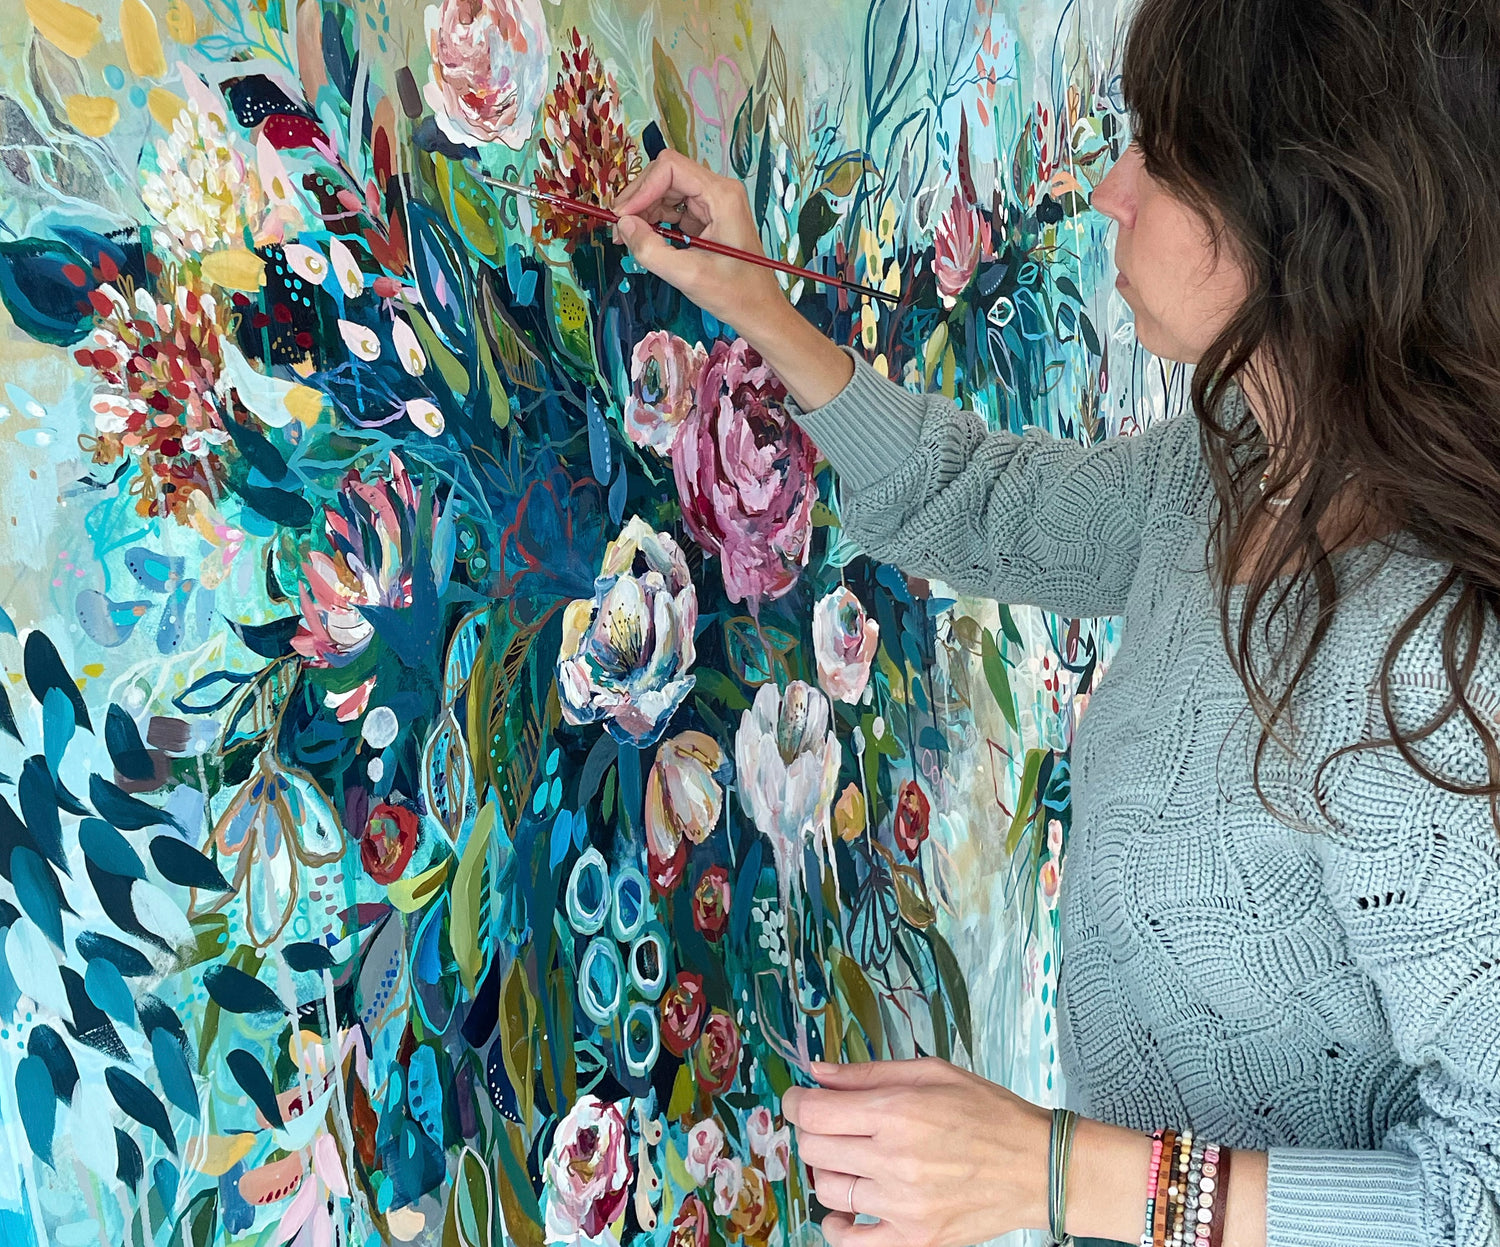 Artist Sunni Mockingbird painting flowers on large stretched canvas in teal, aqua, blue and green leaves with white and pink flowers.